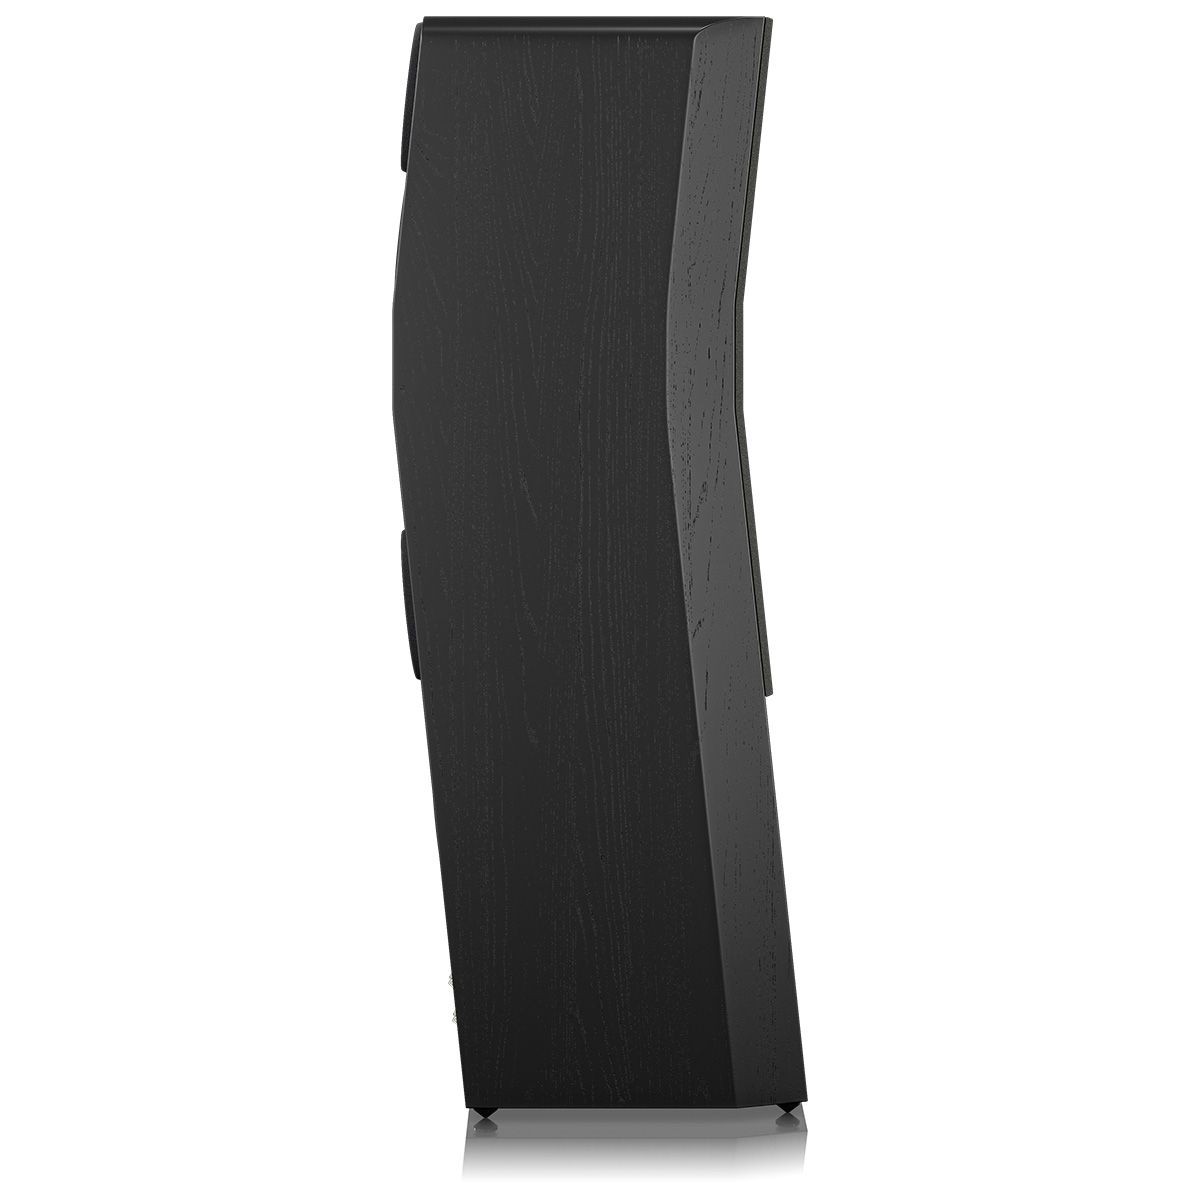 SVS Ultra Evolution Tower Floorstanding Loudspeaker - single black oak with grille - angled rear view without components